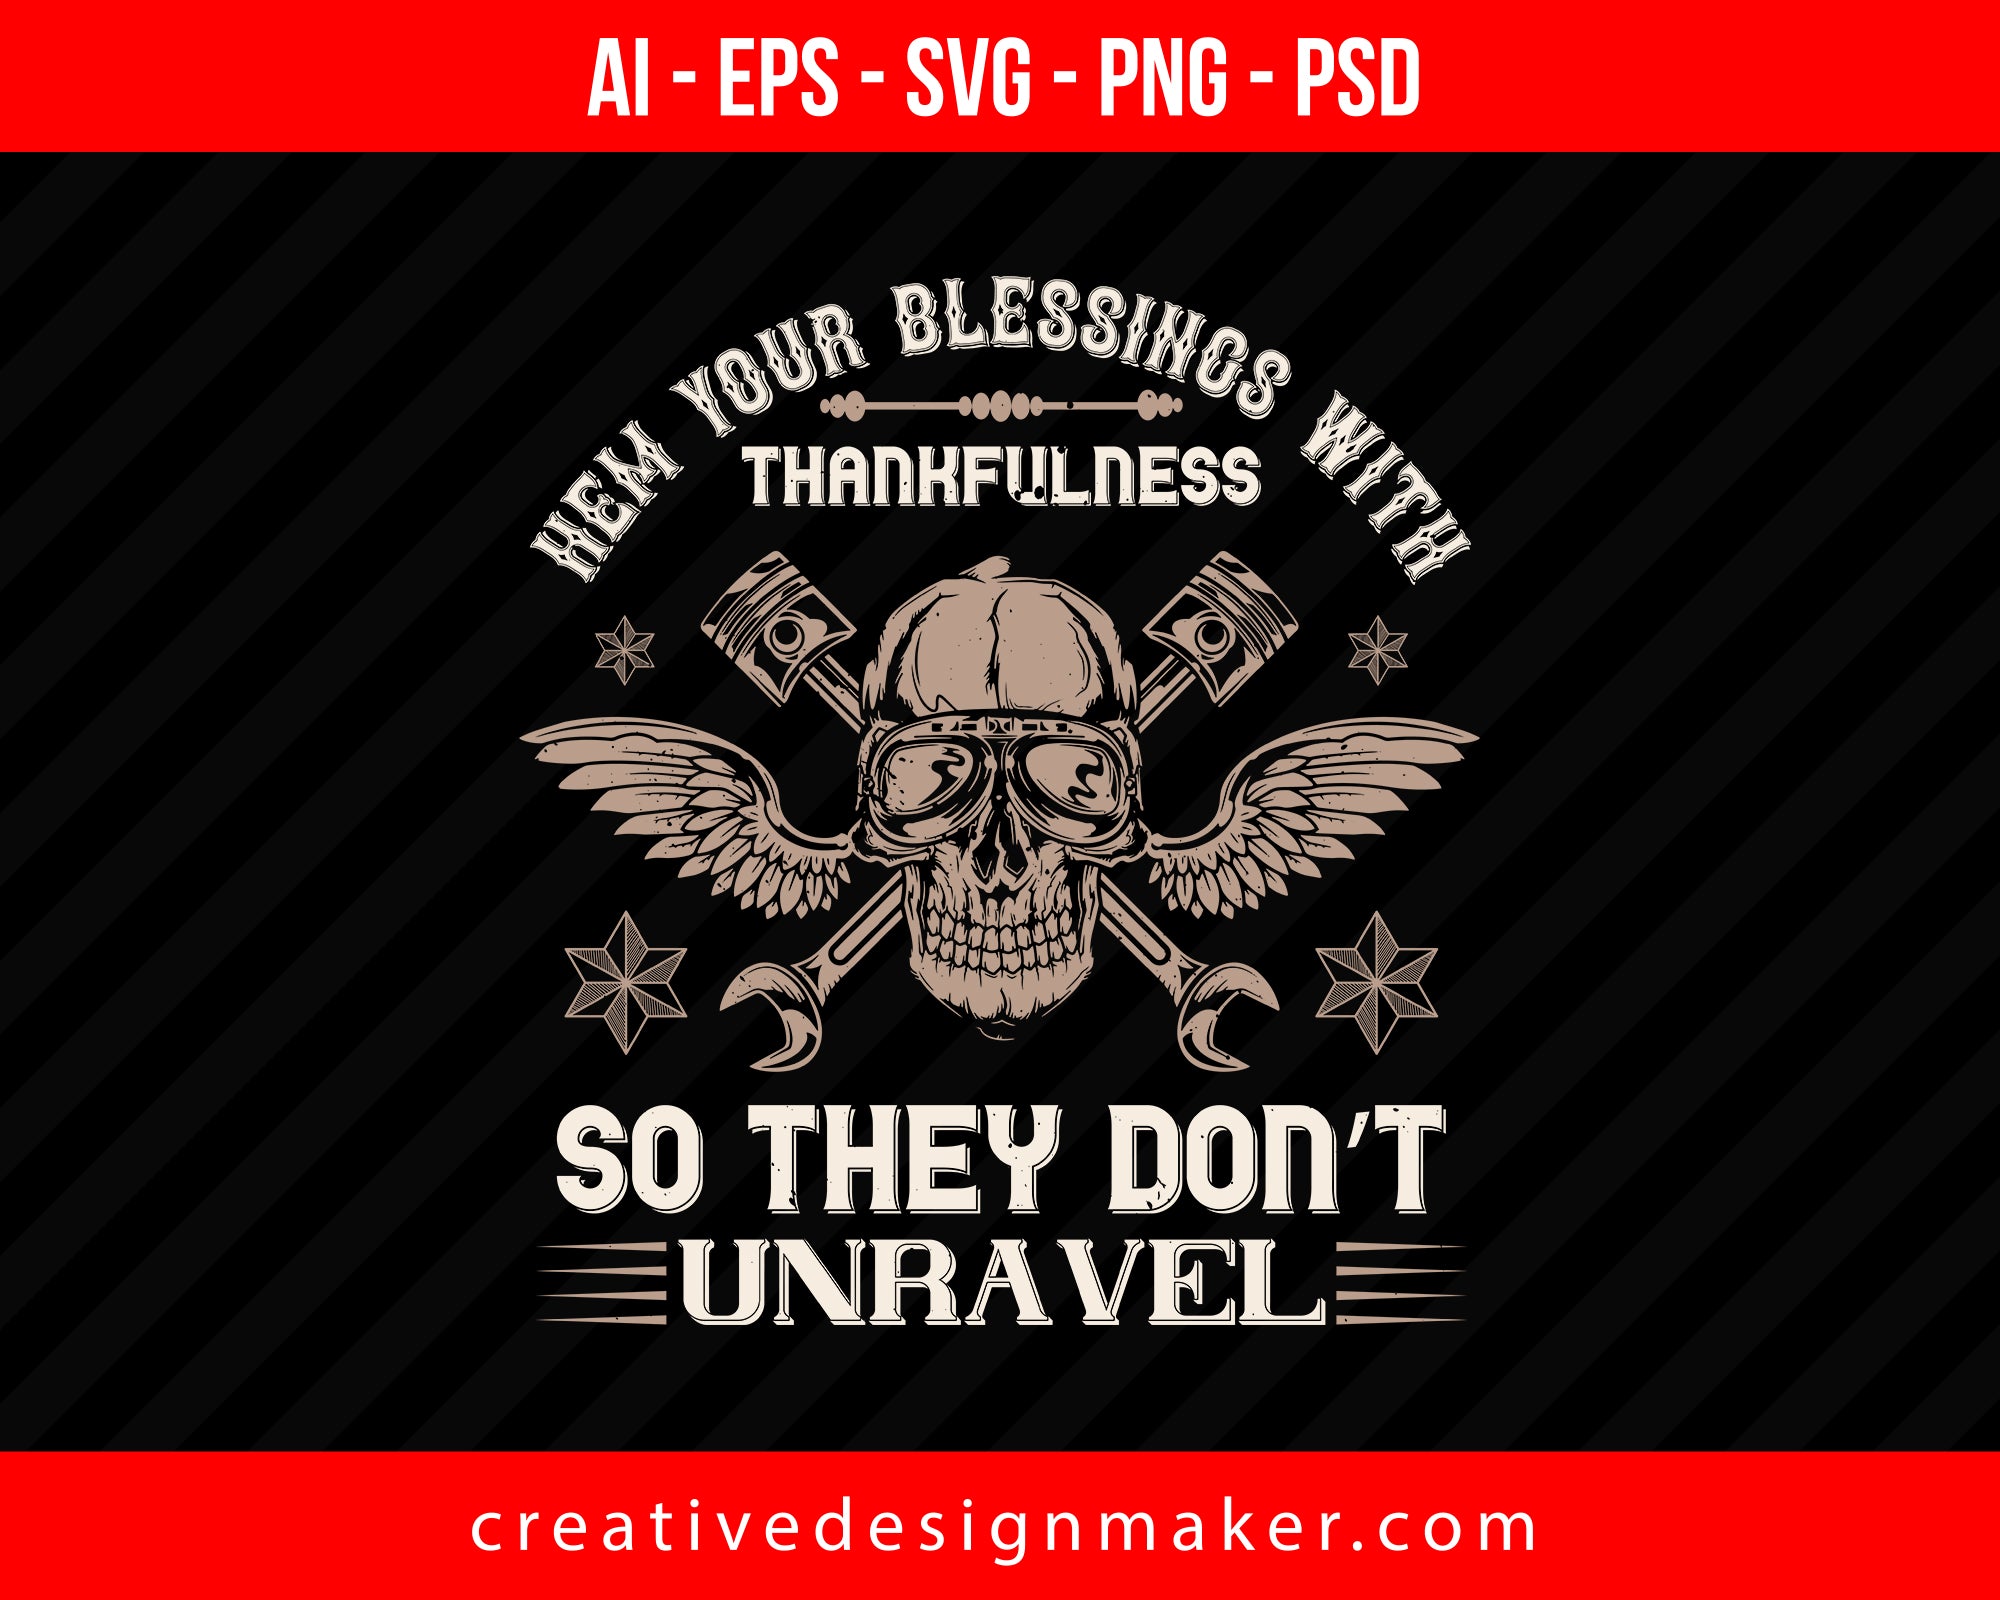 Hem your blessings with thankfulness so they don’t unravel Print Ready Editable T-Shirt SVG Design!